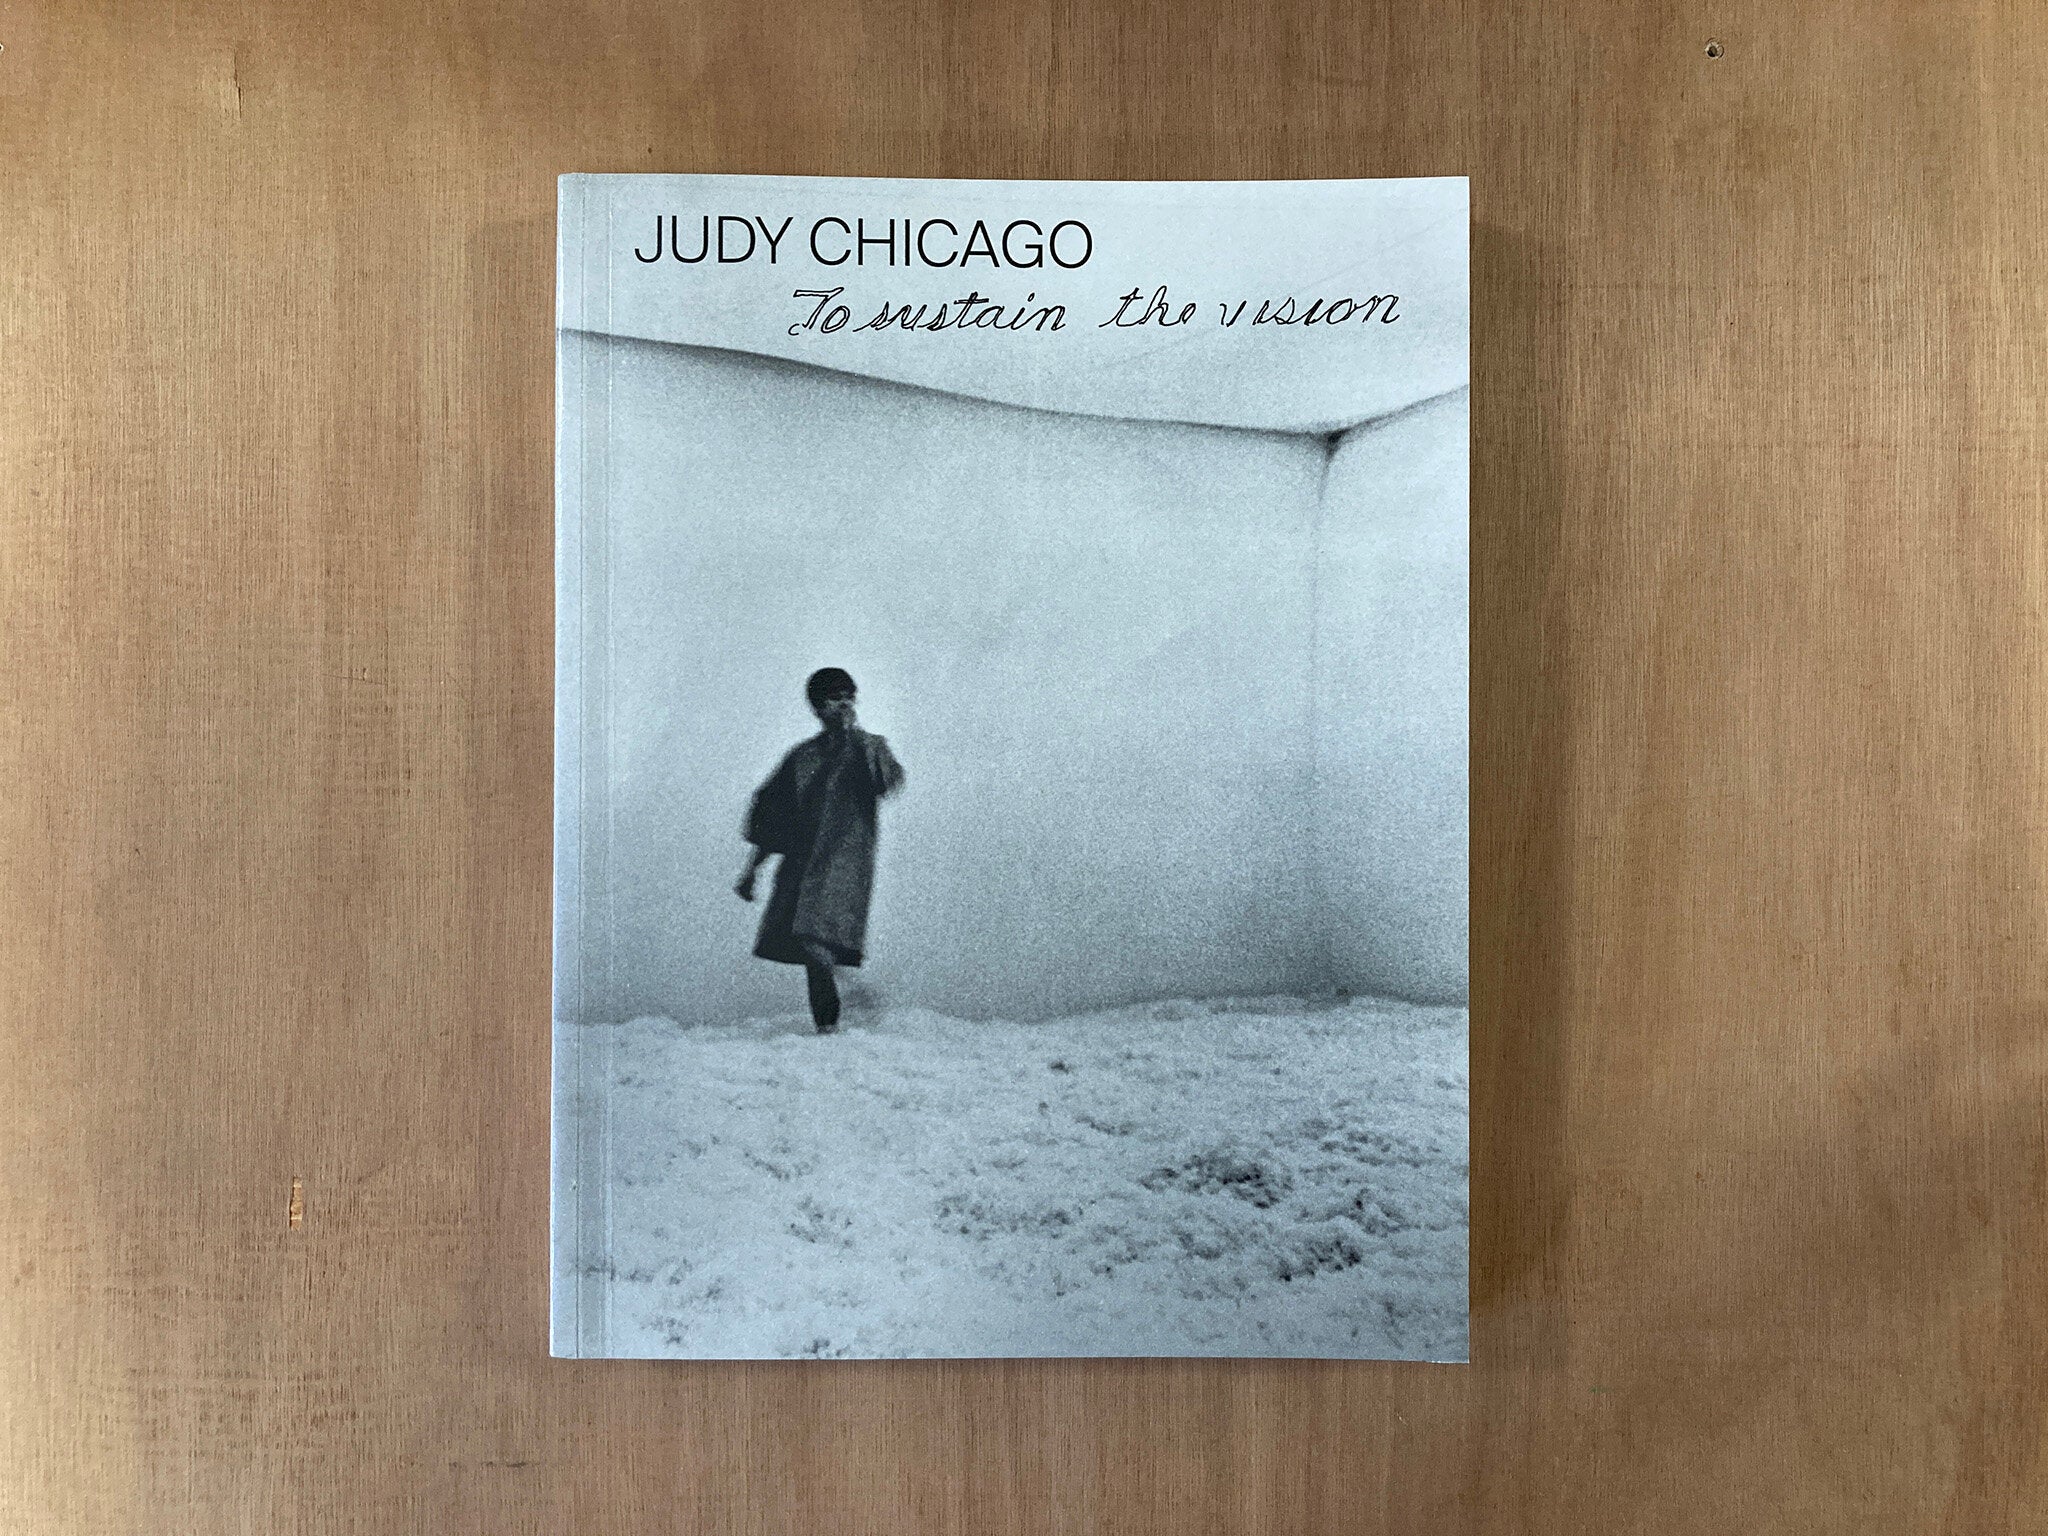 JUDY CHICAGO – TO SUSTAIN THE VISION by Géraldine Gourbe